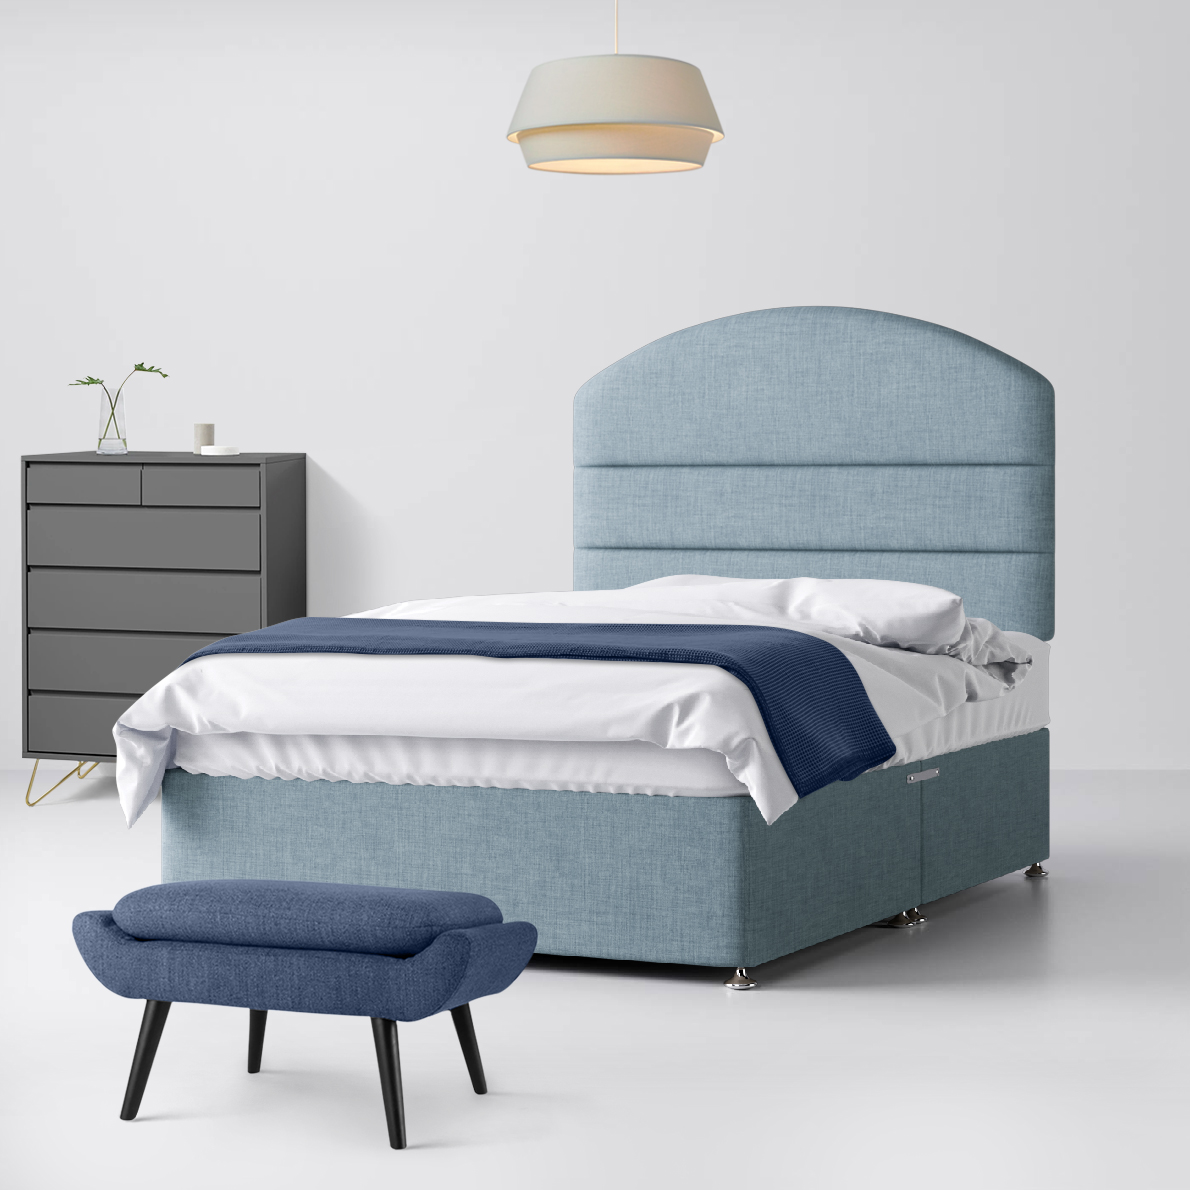 Small Single - Divan Bed and Dudley Lined Headboard - Duck Egg Blue - Fabric - 2ft6 - Happy Beds